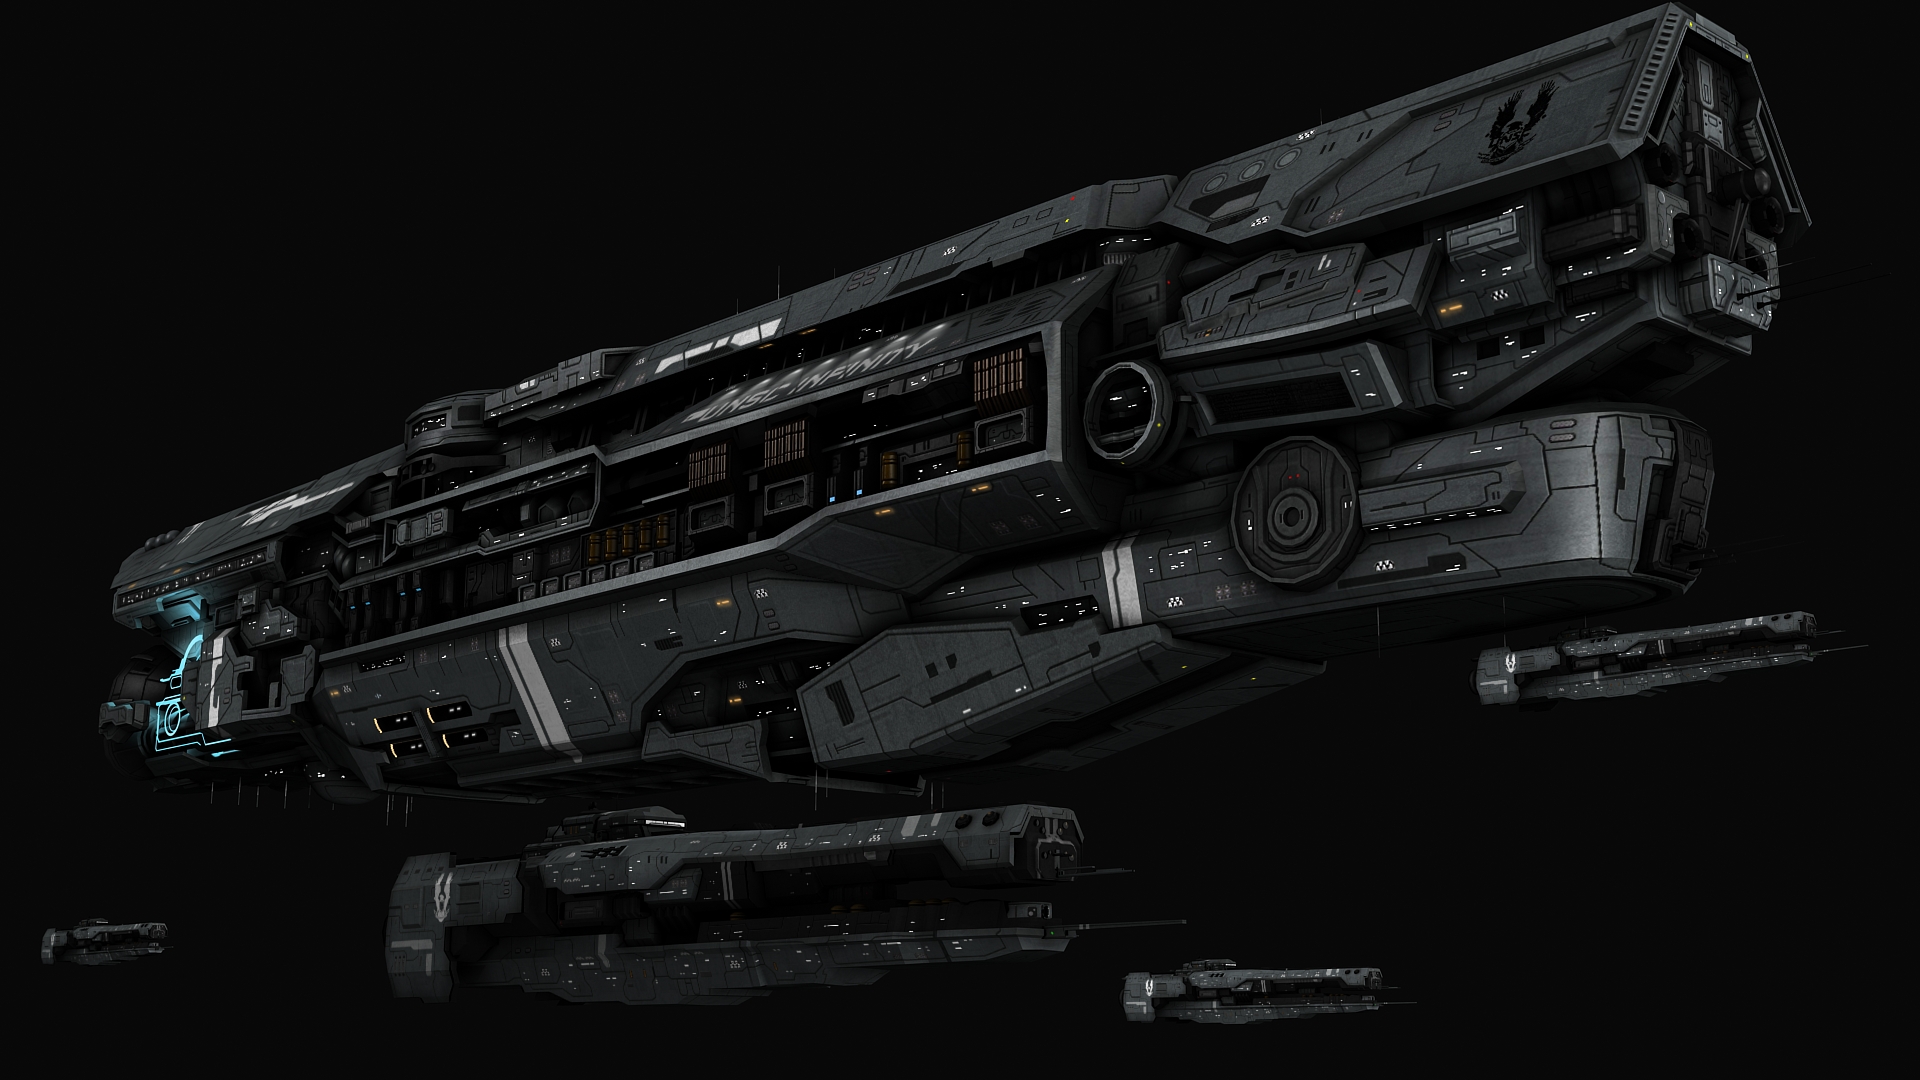 Unsc Infinity Class Warship Image Sins Of The Prophets Mod For Sins Of A Solar Empire Rebellion Mod Db